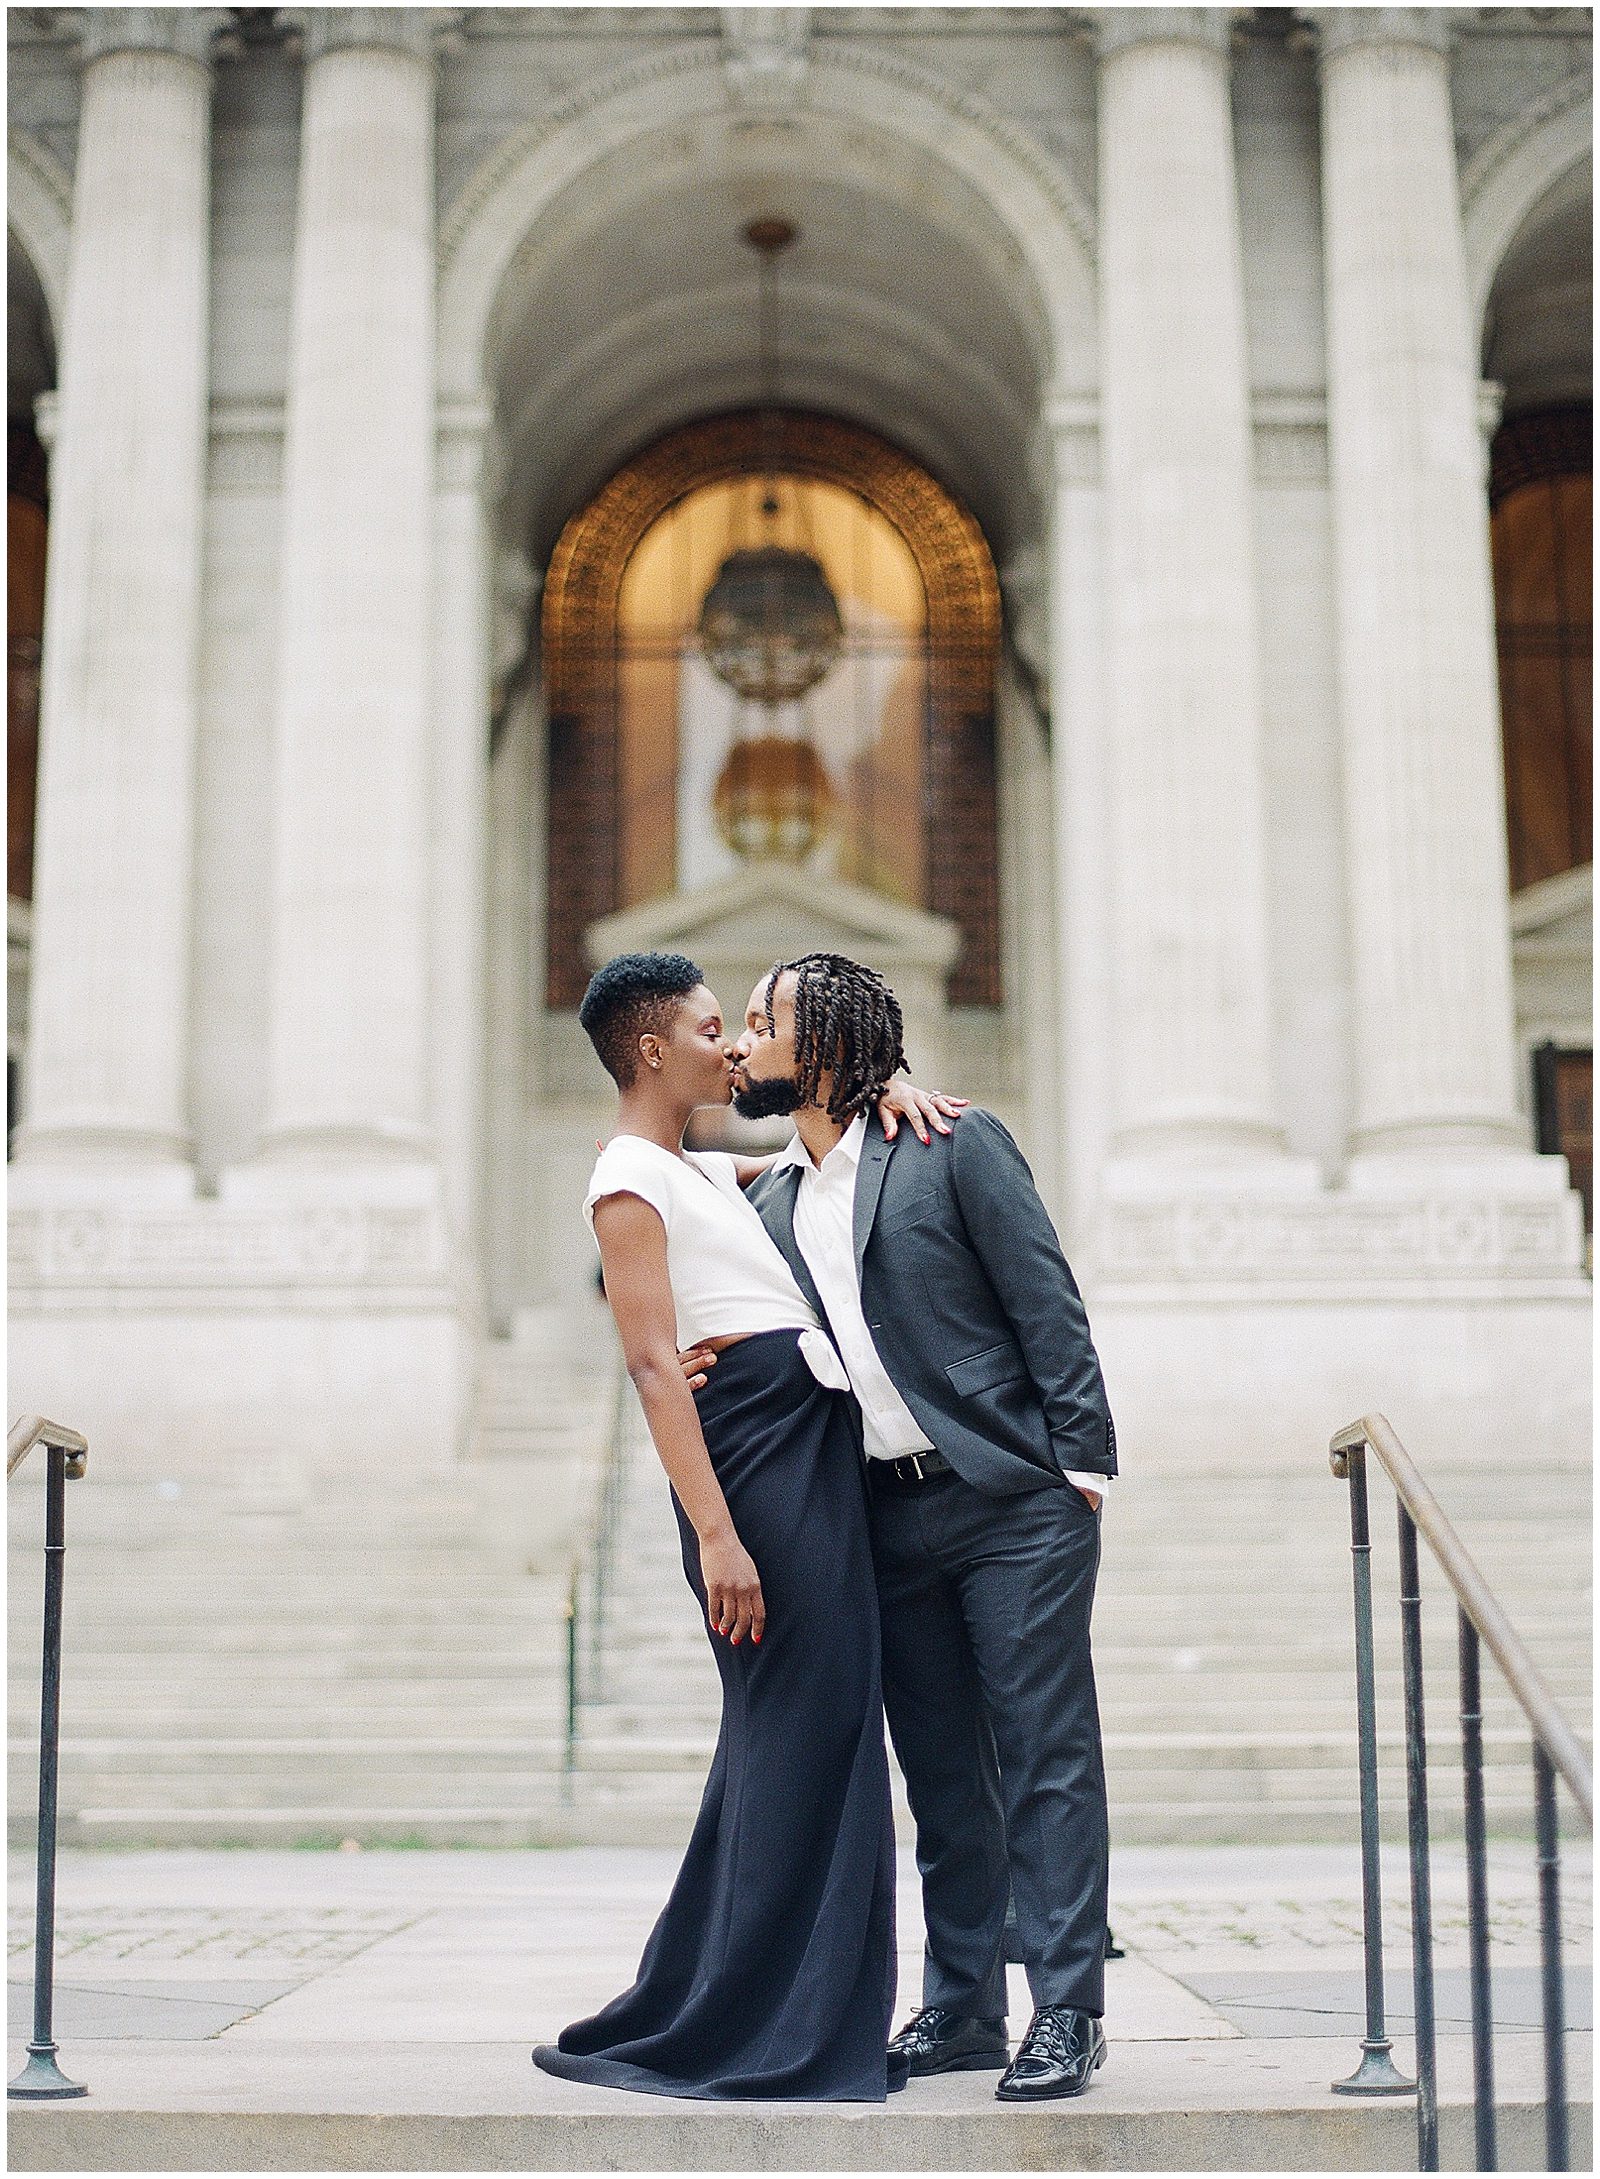 New York City Engagement Photos Couple Kissing On Stairs Photo